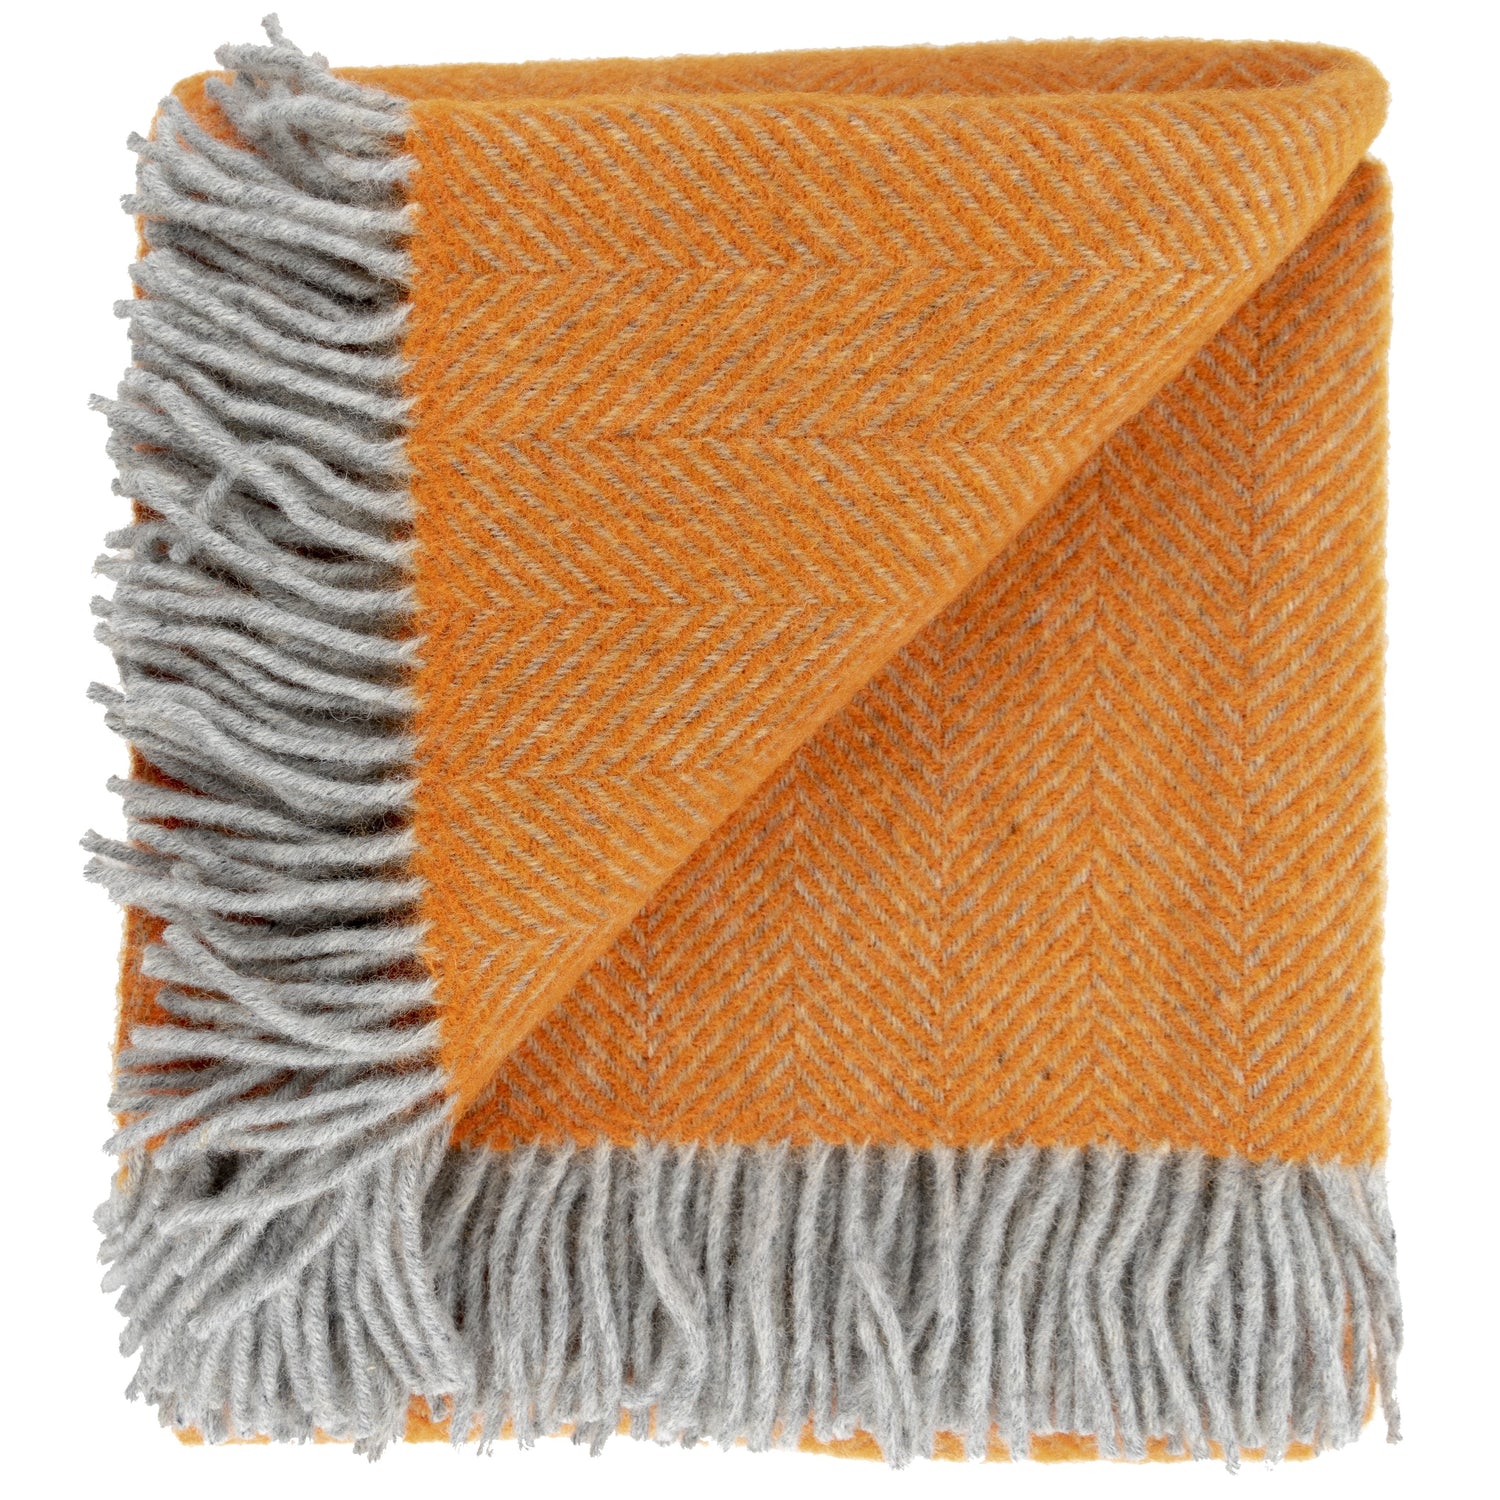 Highland Tweed Herringbone Pure New Wool Throw ~ Atomic Orange ~-Throws and Blankets-Prince of Scots-00810032750053-K4050030-029-Prince of Scots